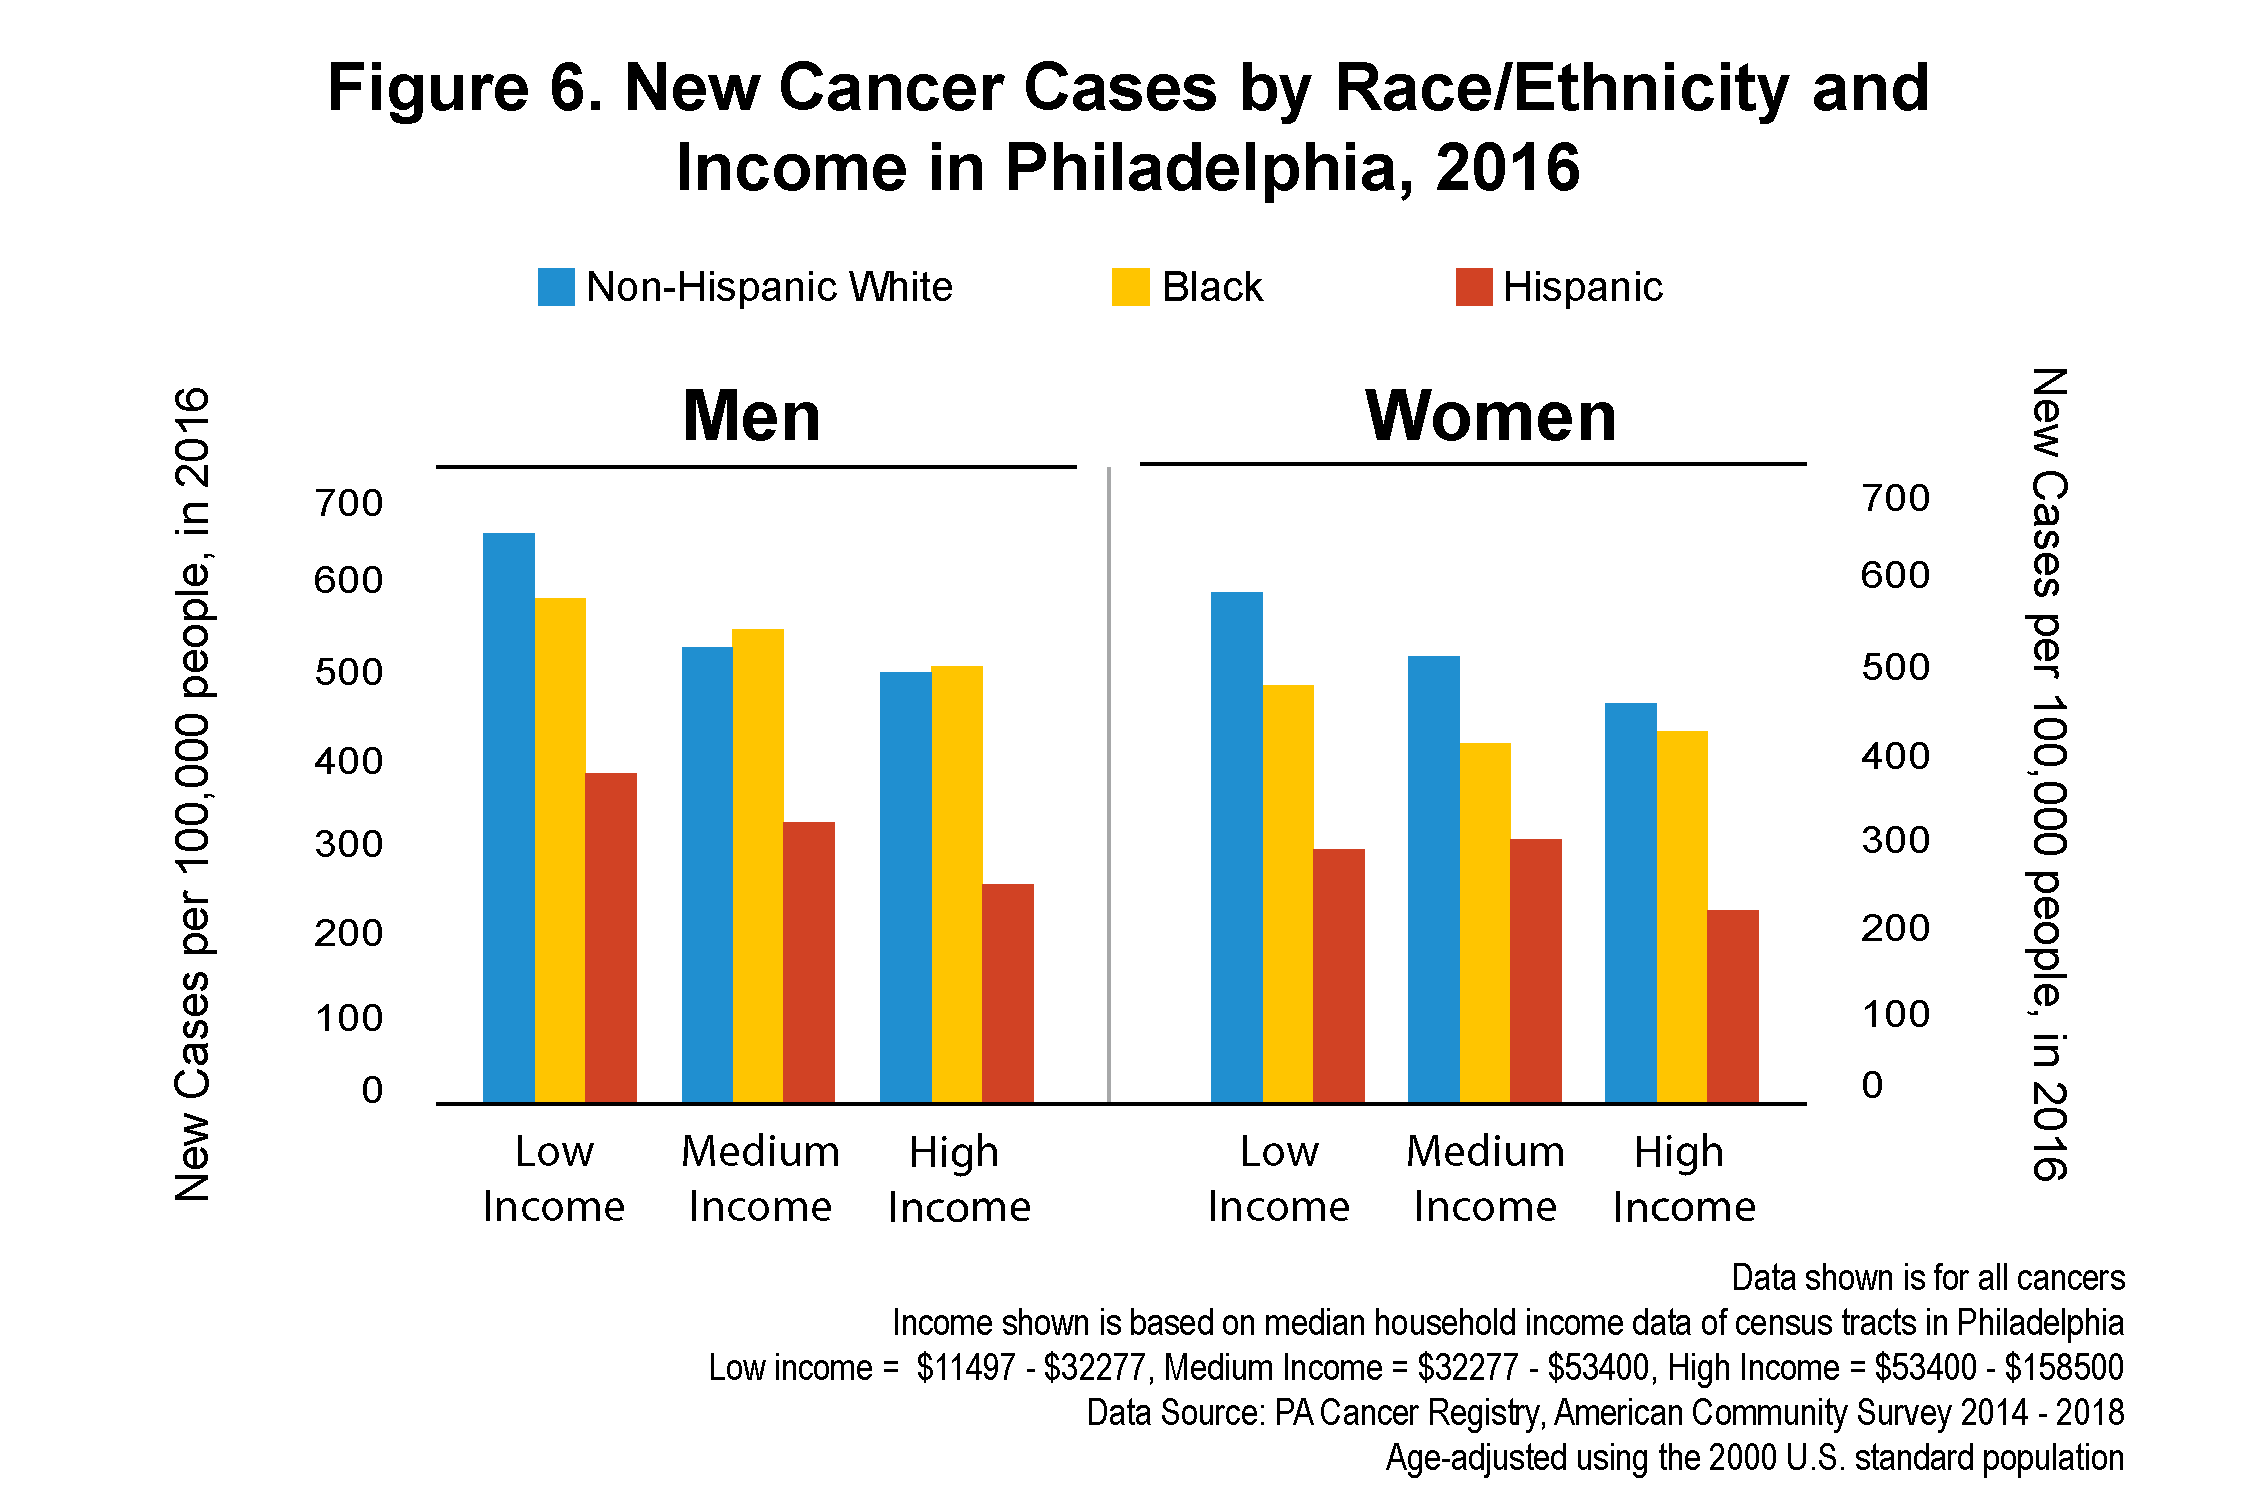 Figure 6. New Cancer Cases by Race/Ethnicity and Income in Philadelphia, 2016